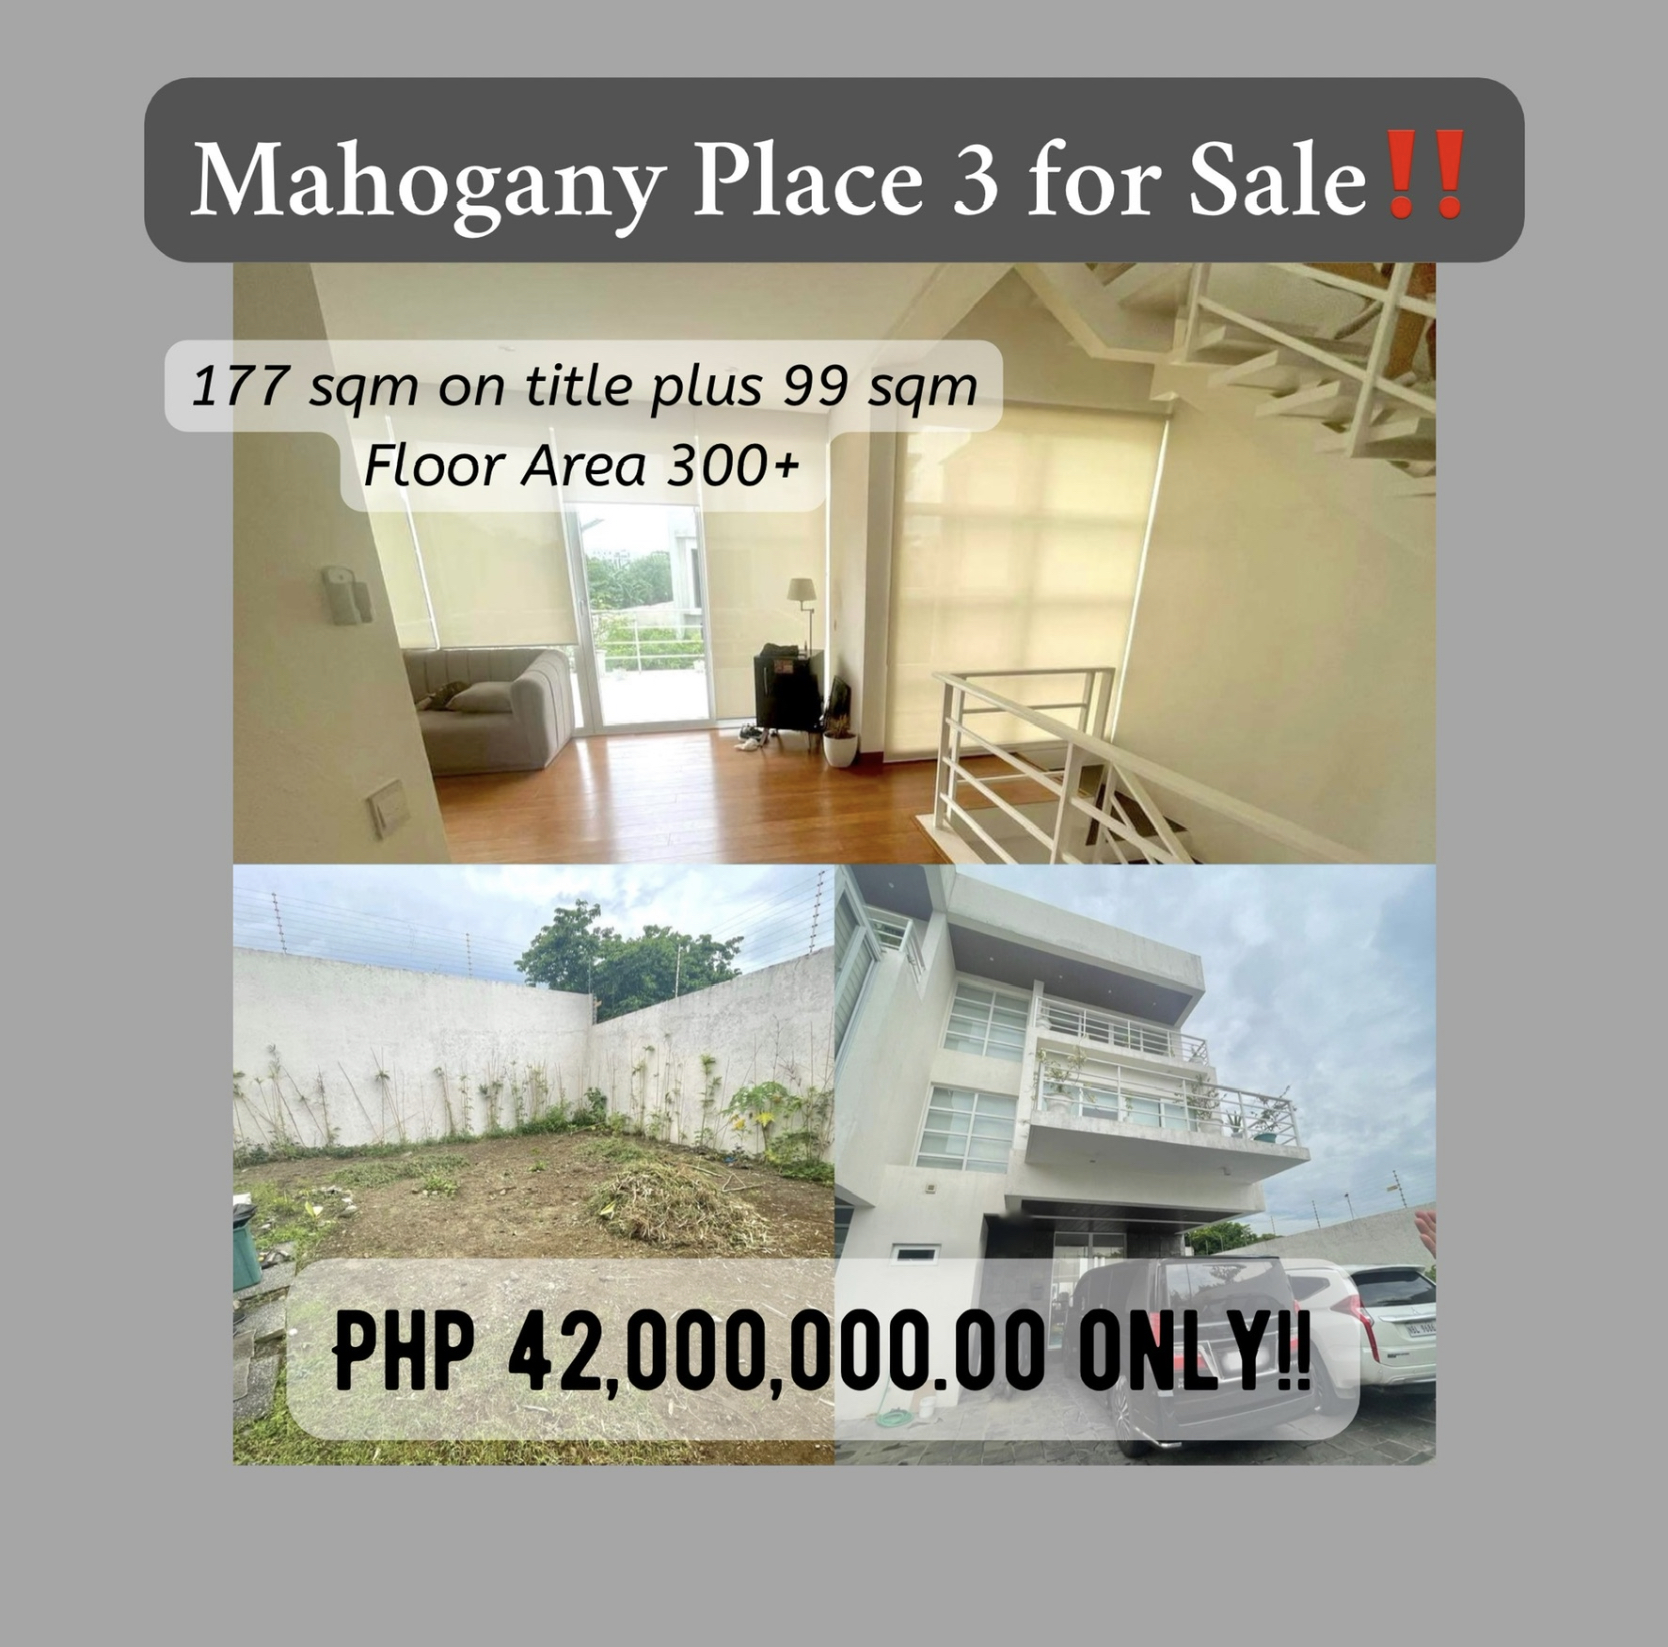 Mahogany Place 3 Milla for Sale‼️